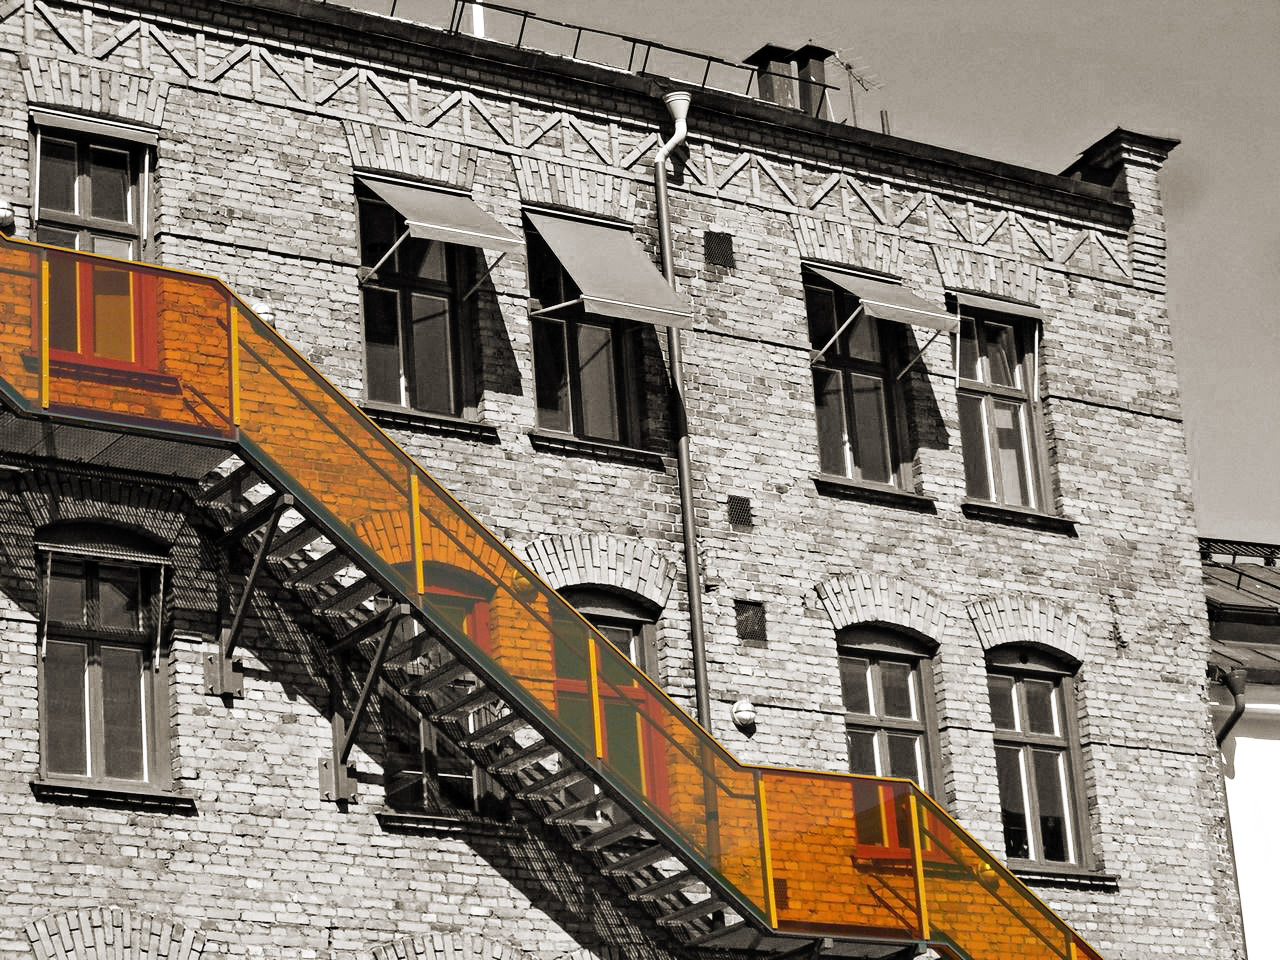 Photo Credit: Stairs by Francesco *******